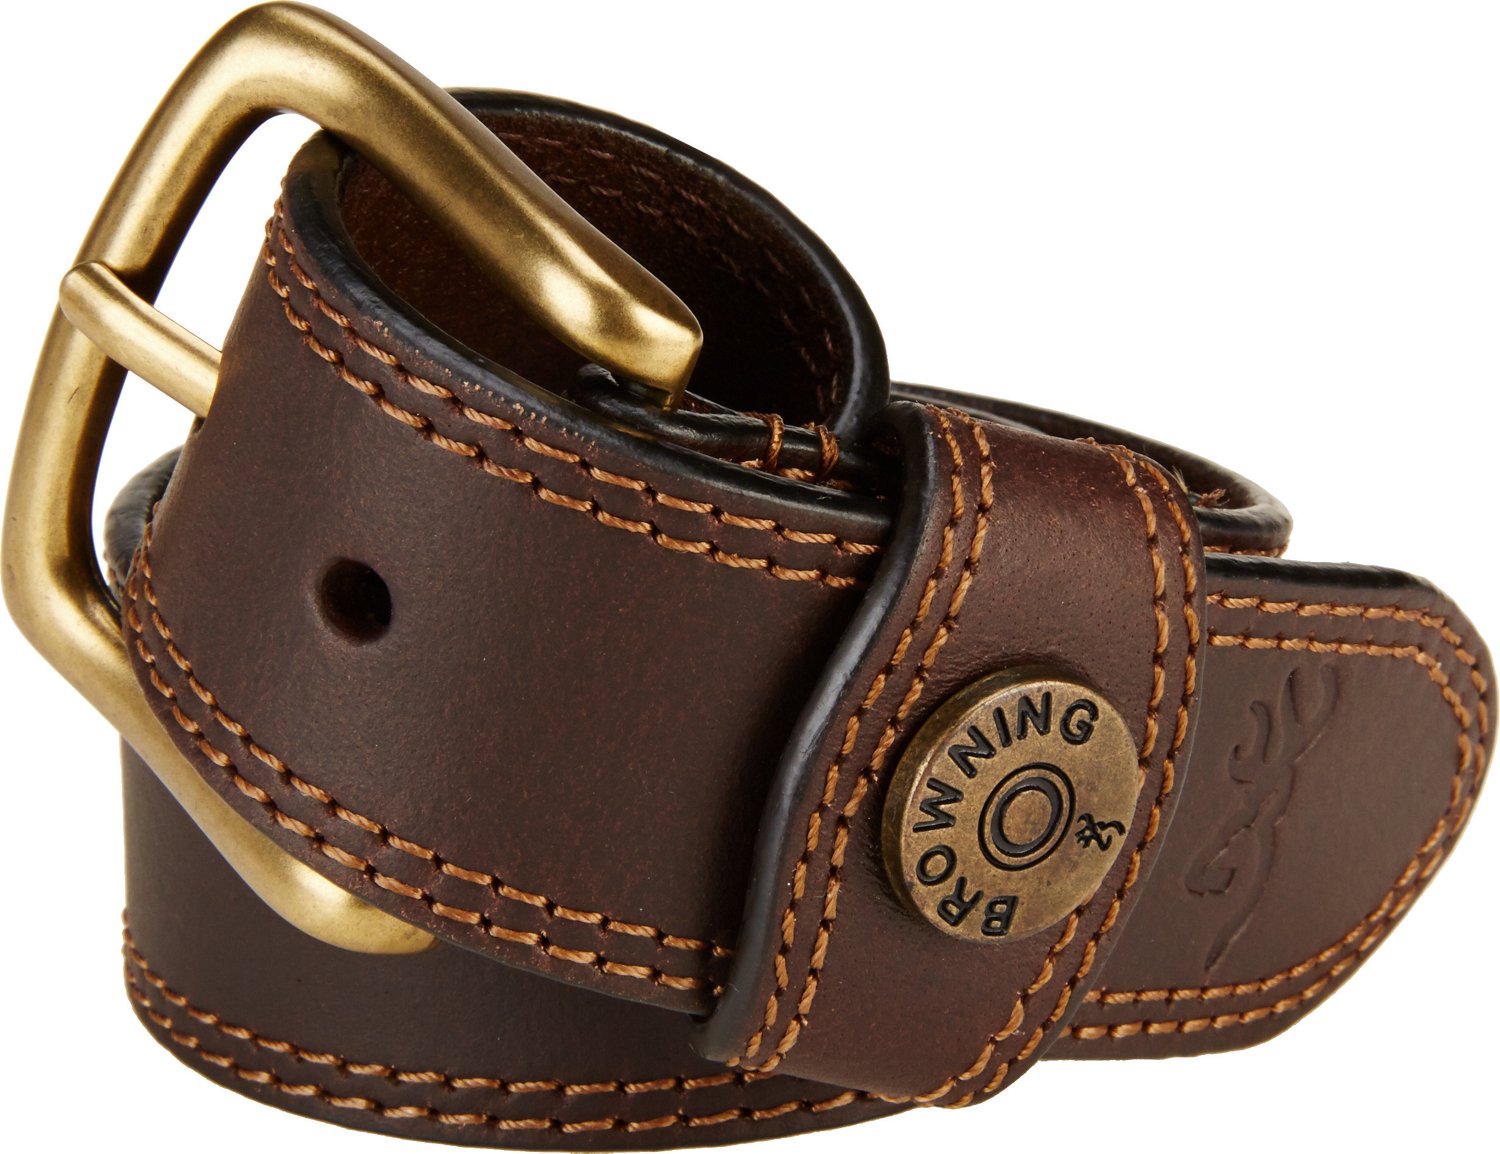 Browning Wasatch Leather Belt | Literacy Basics